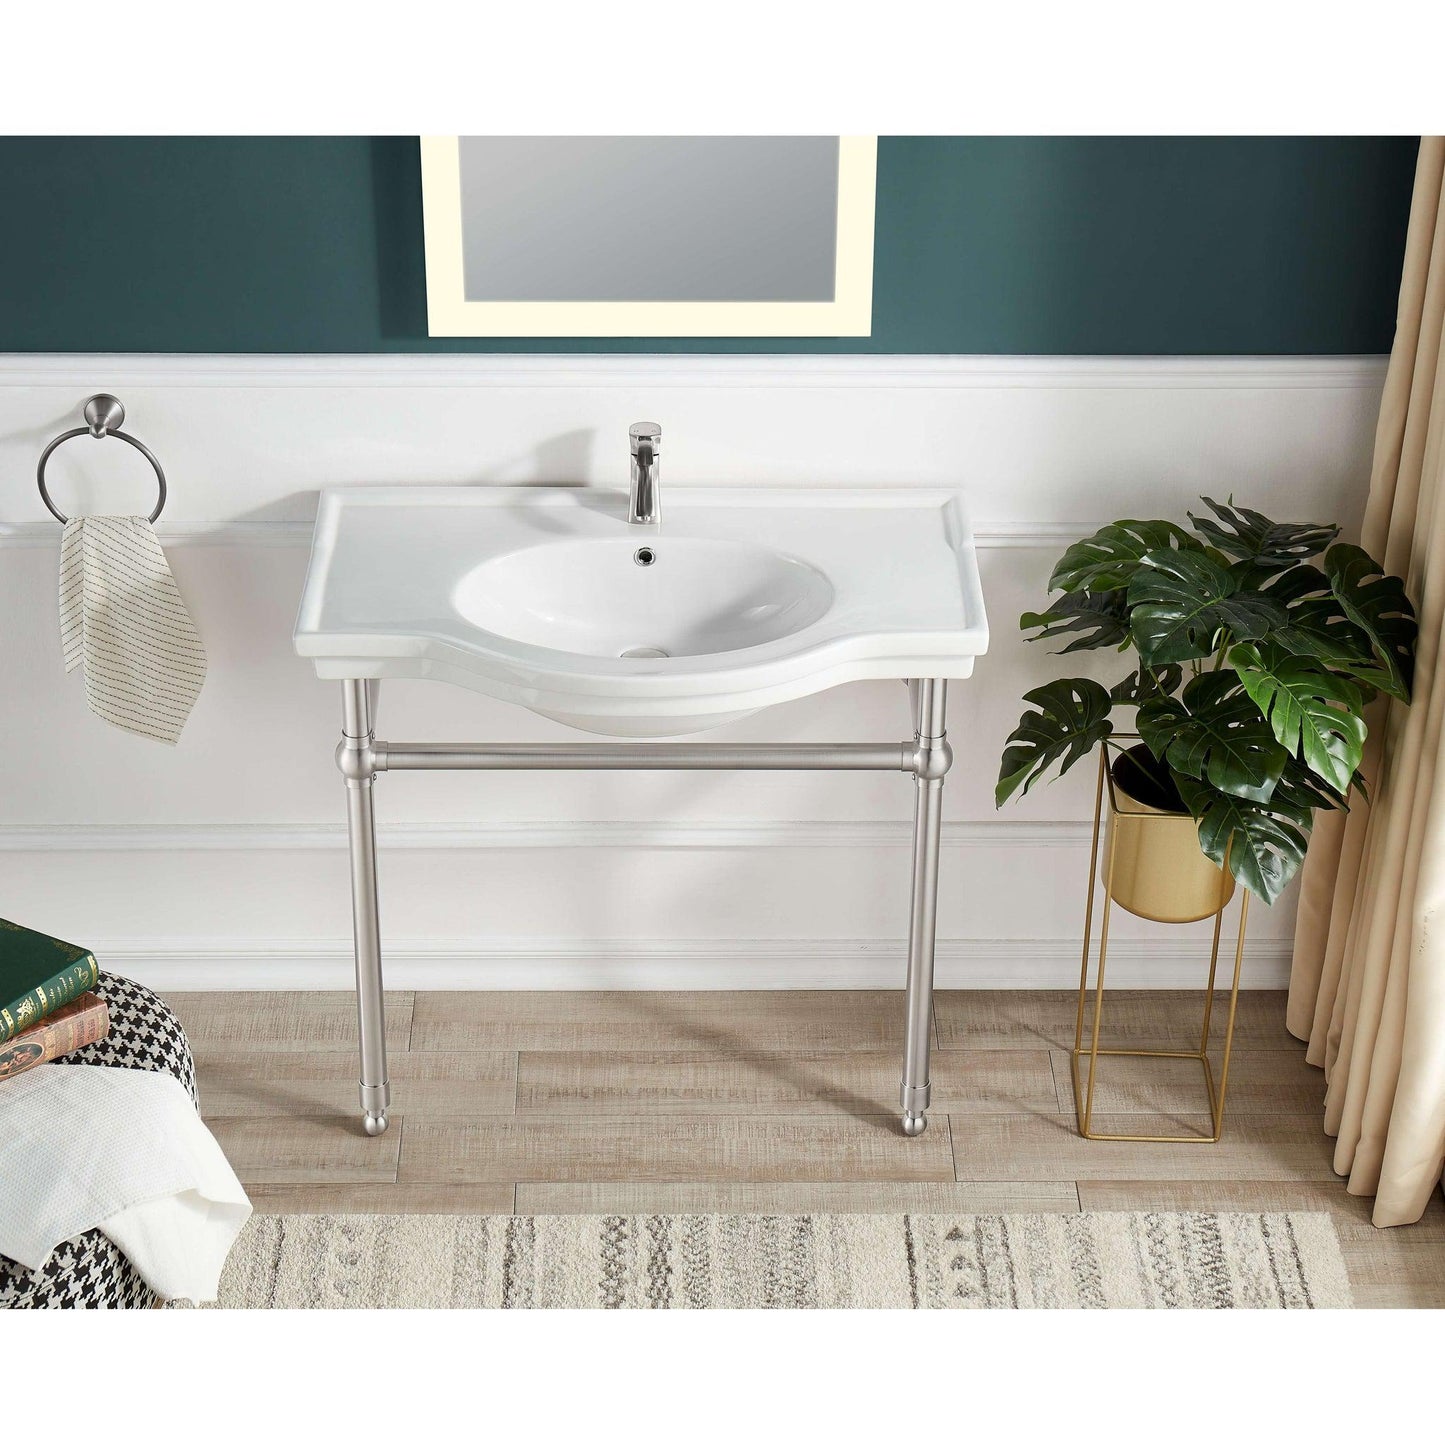 ANZZI Viola Series 35" x 34" White Ceramic Console Sink With Brushed Nickel Stainless Steel Stand Legs